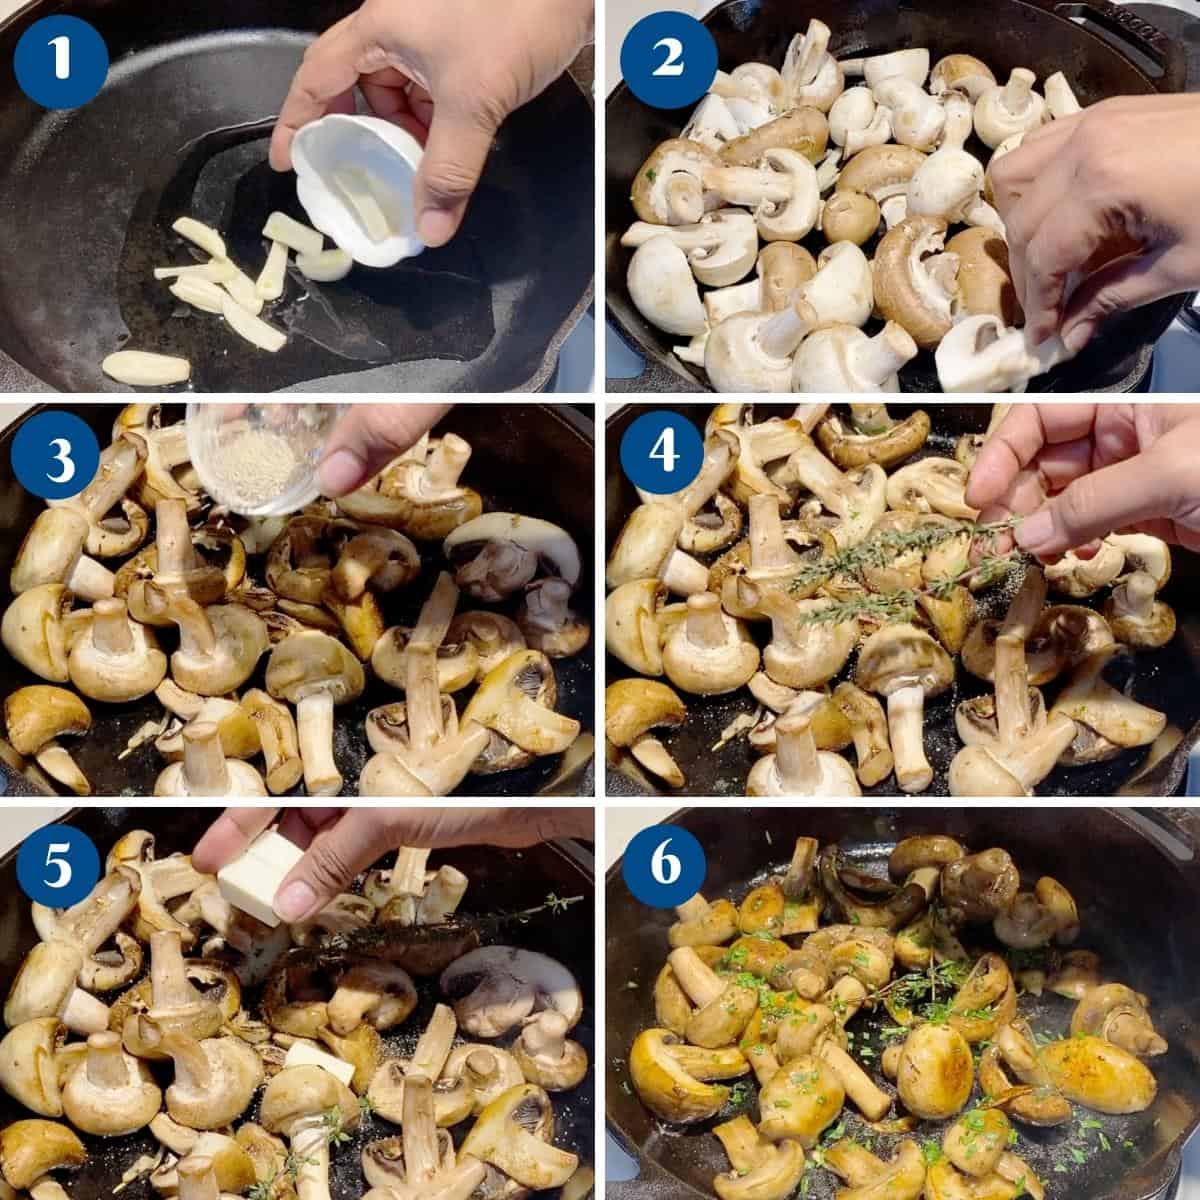 Progress pictures for making sauteed mushrooms.